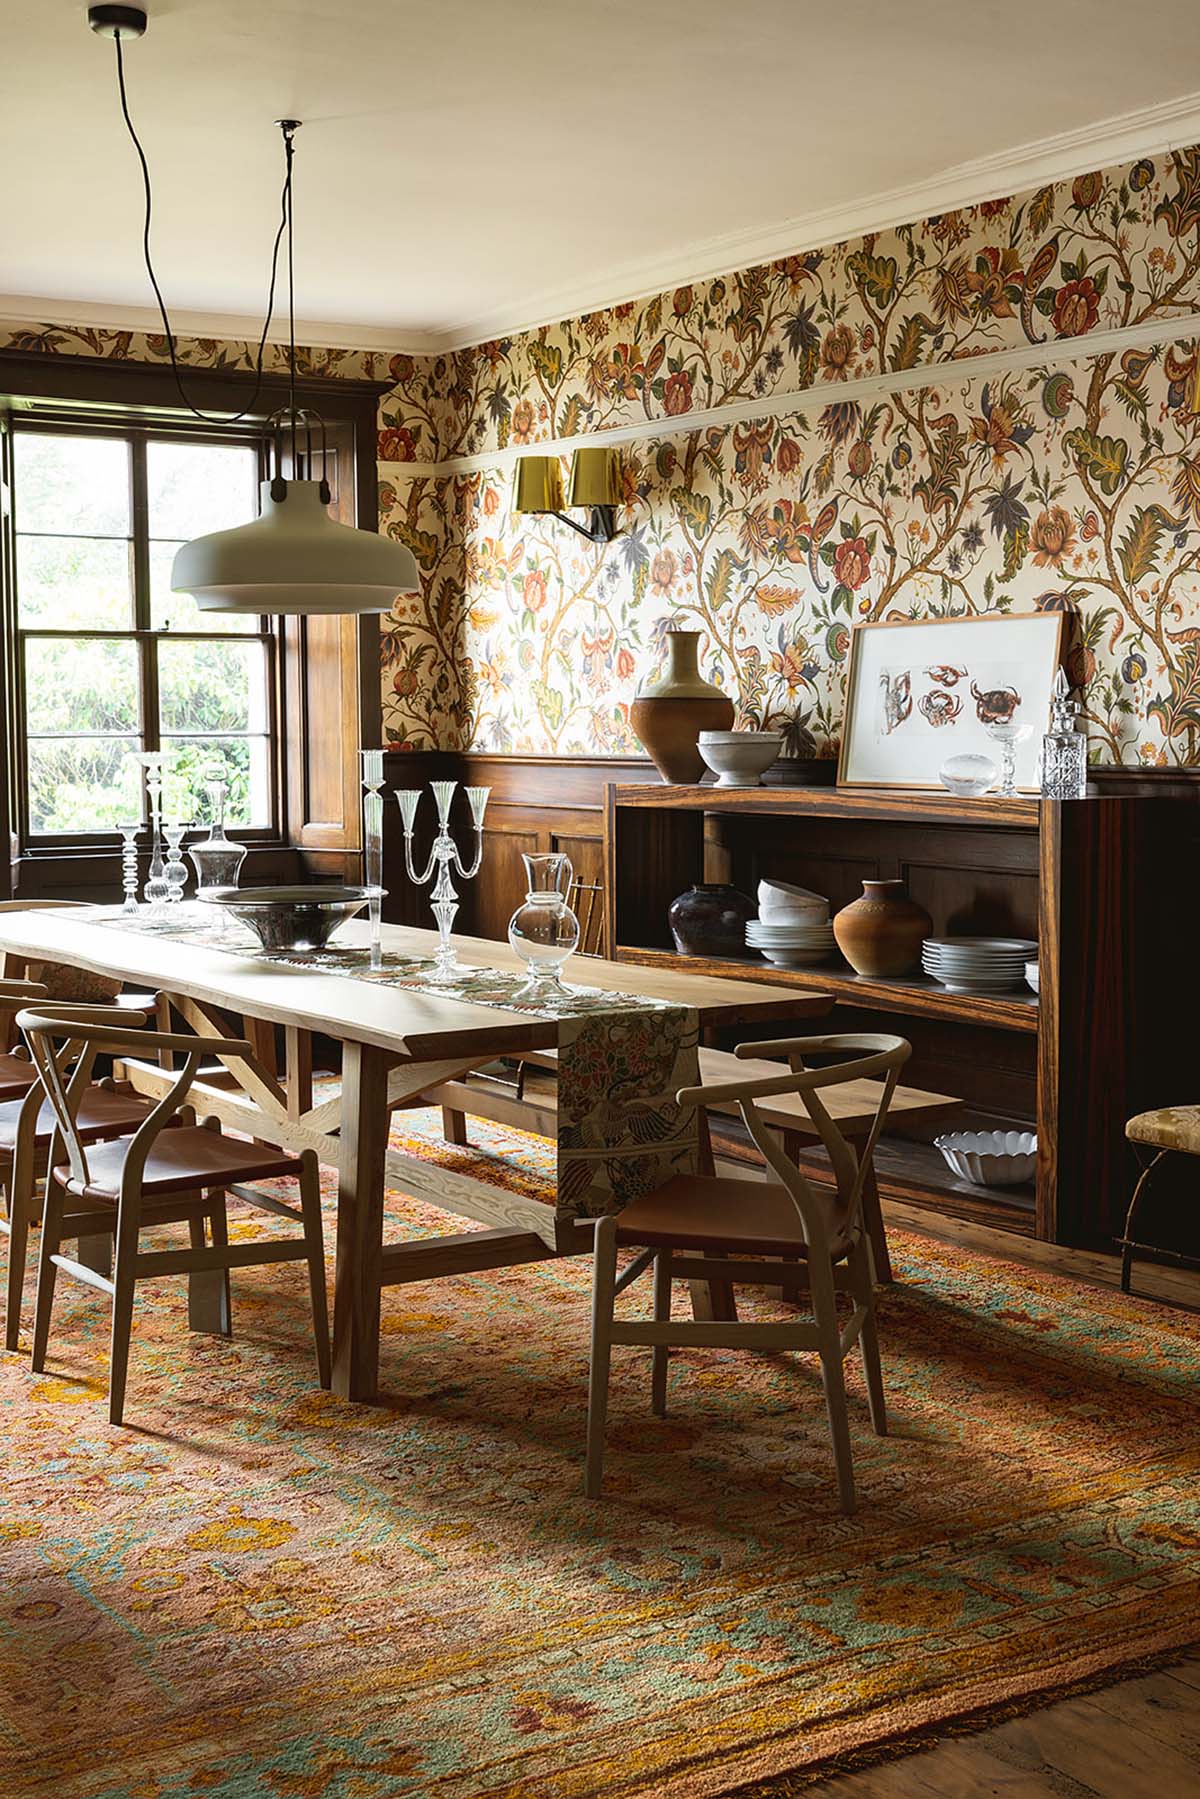 Dining area that finds the perfect match between rustic and artistic in Scotland